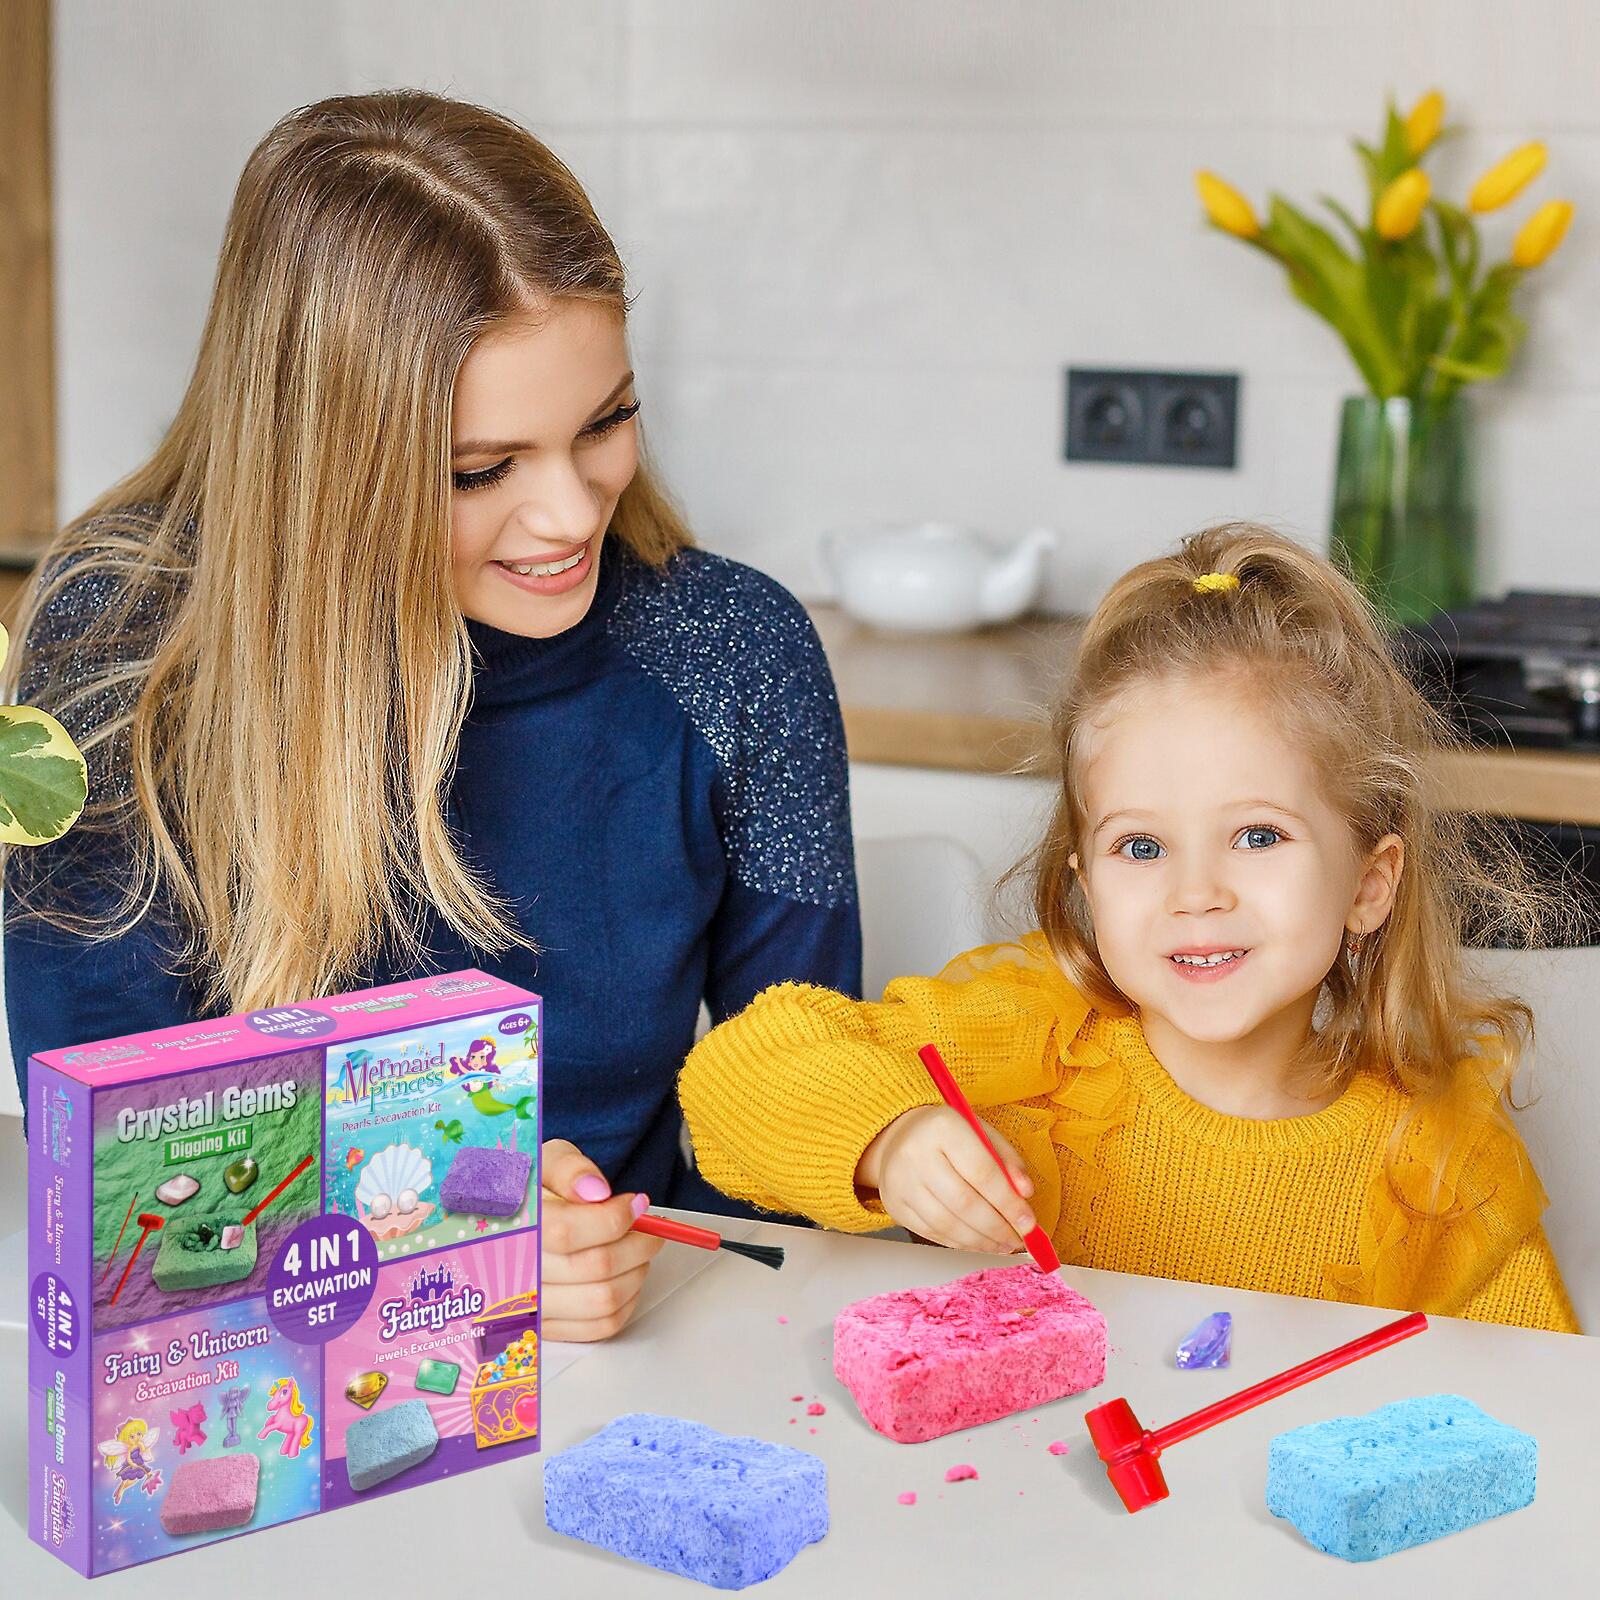 4 in 1 Excavation Set for Girls by The Magic Toy Shop - The Magic Toy Shop